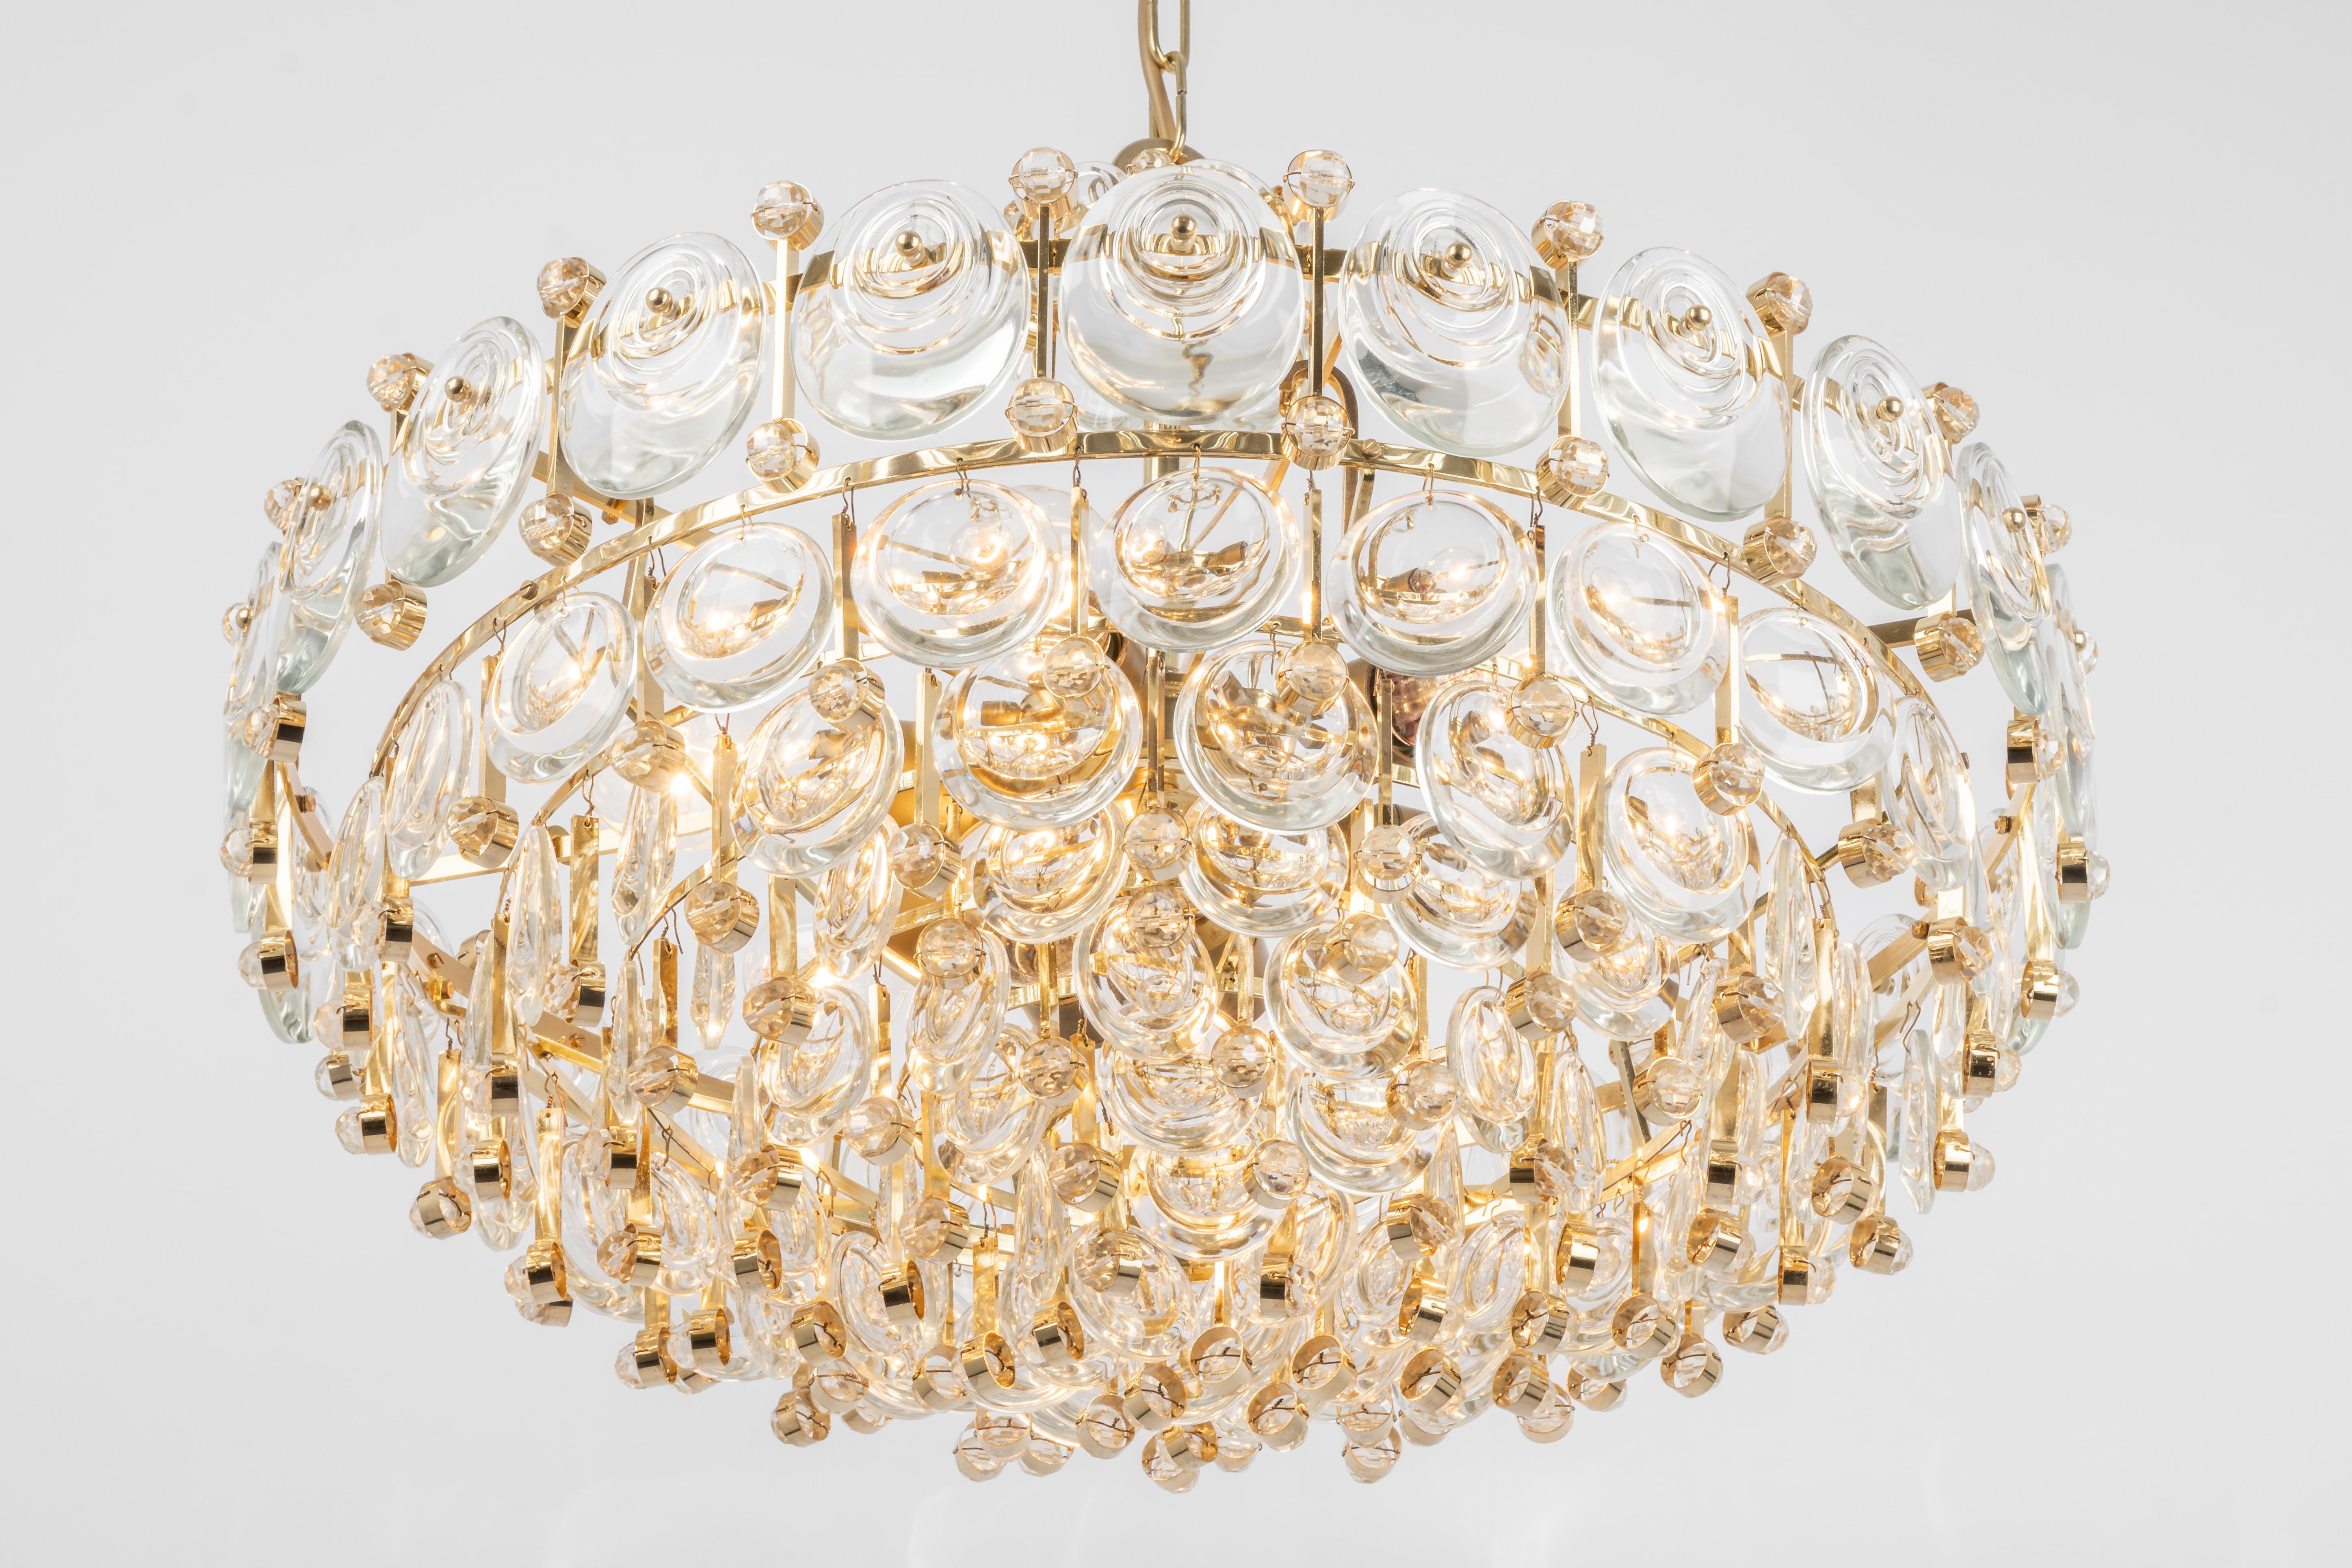 Delicate floral chandelier with crystal glass and gilded brass parts made by Palwa, Sciolari Design Germany, 1970s. Featuring a multitude of crystal glasses.
Measures: Diameter 24